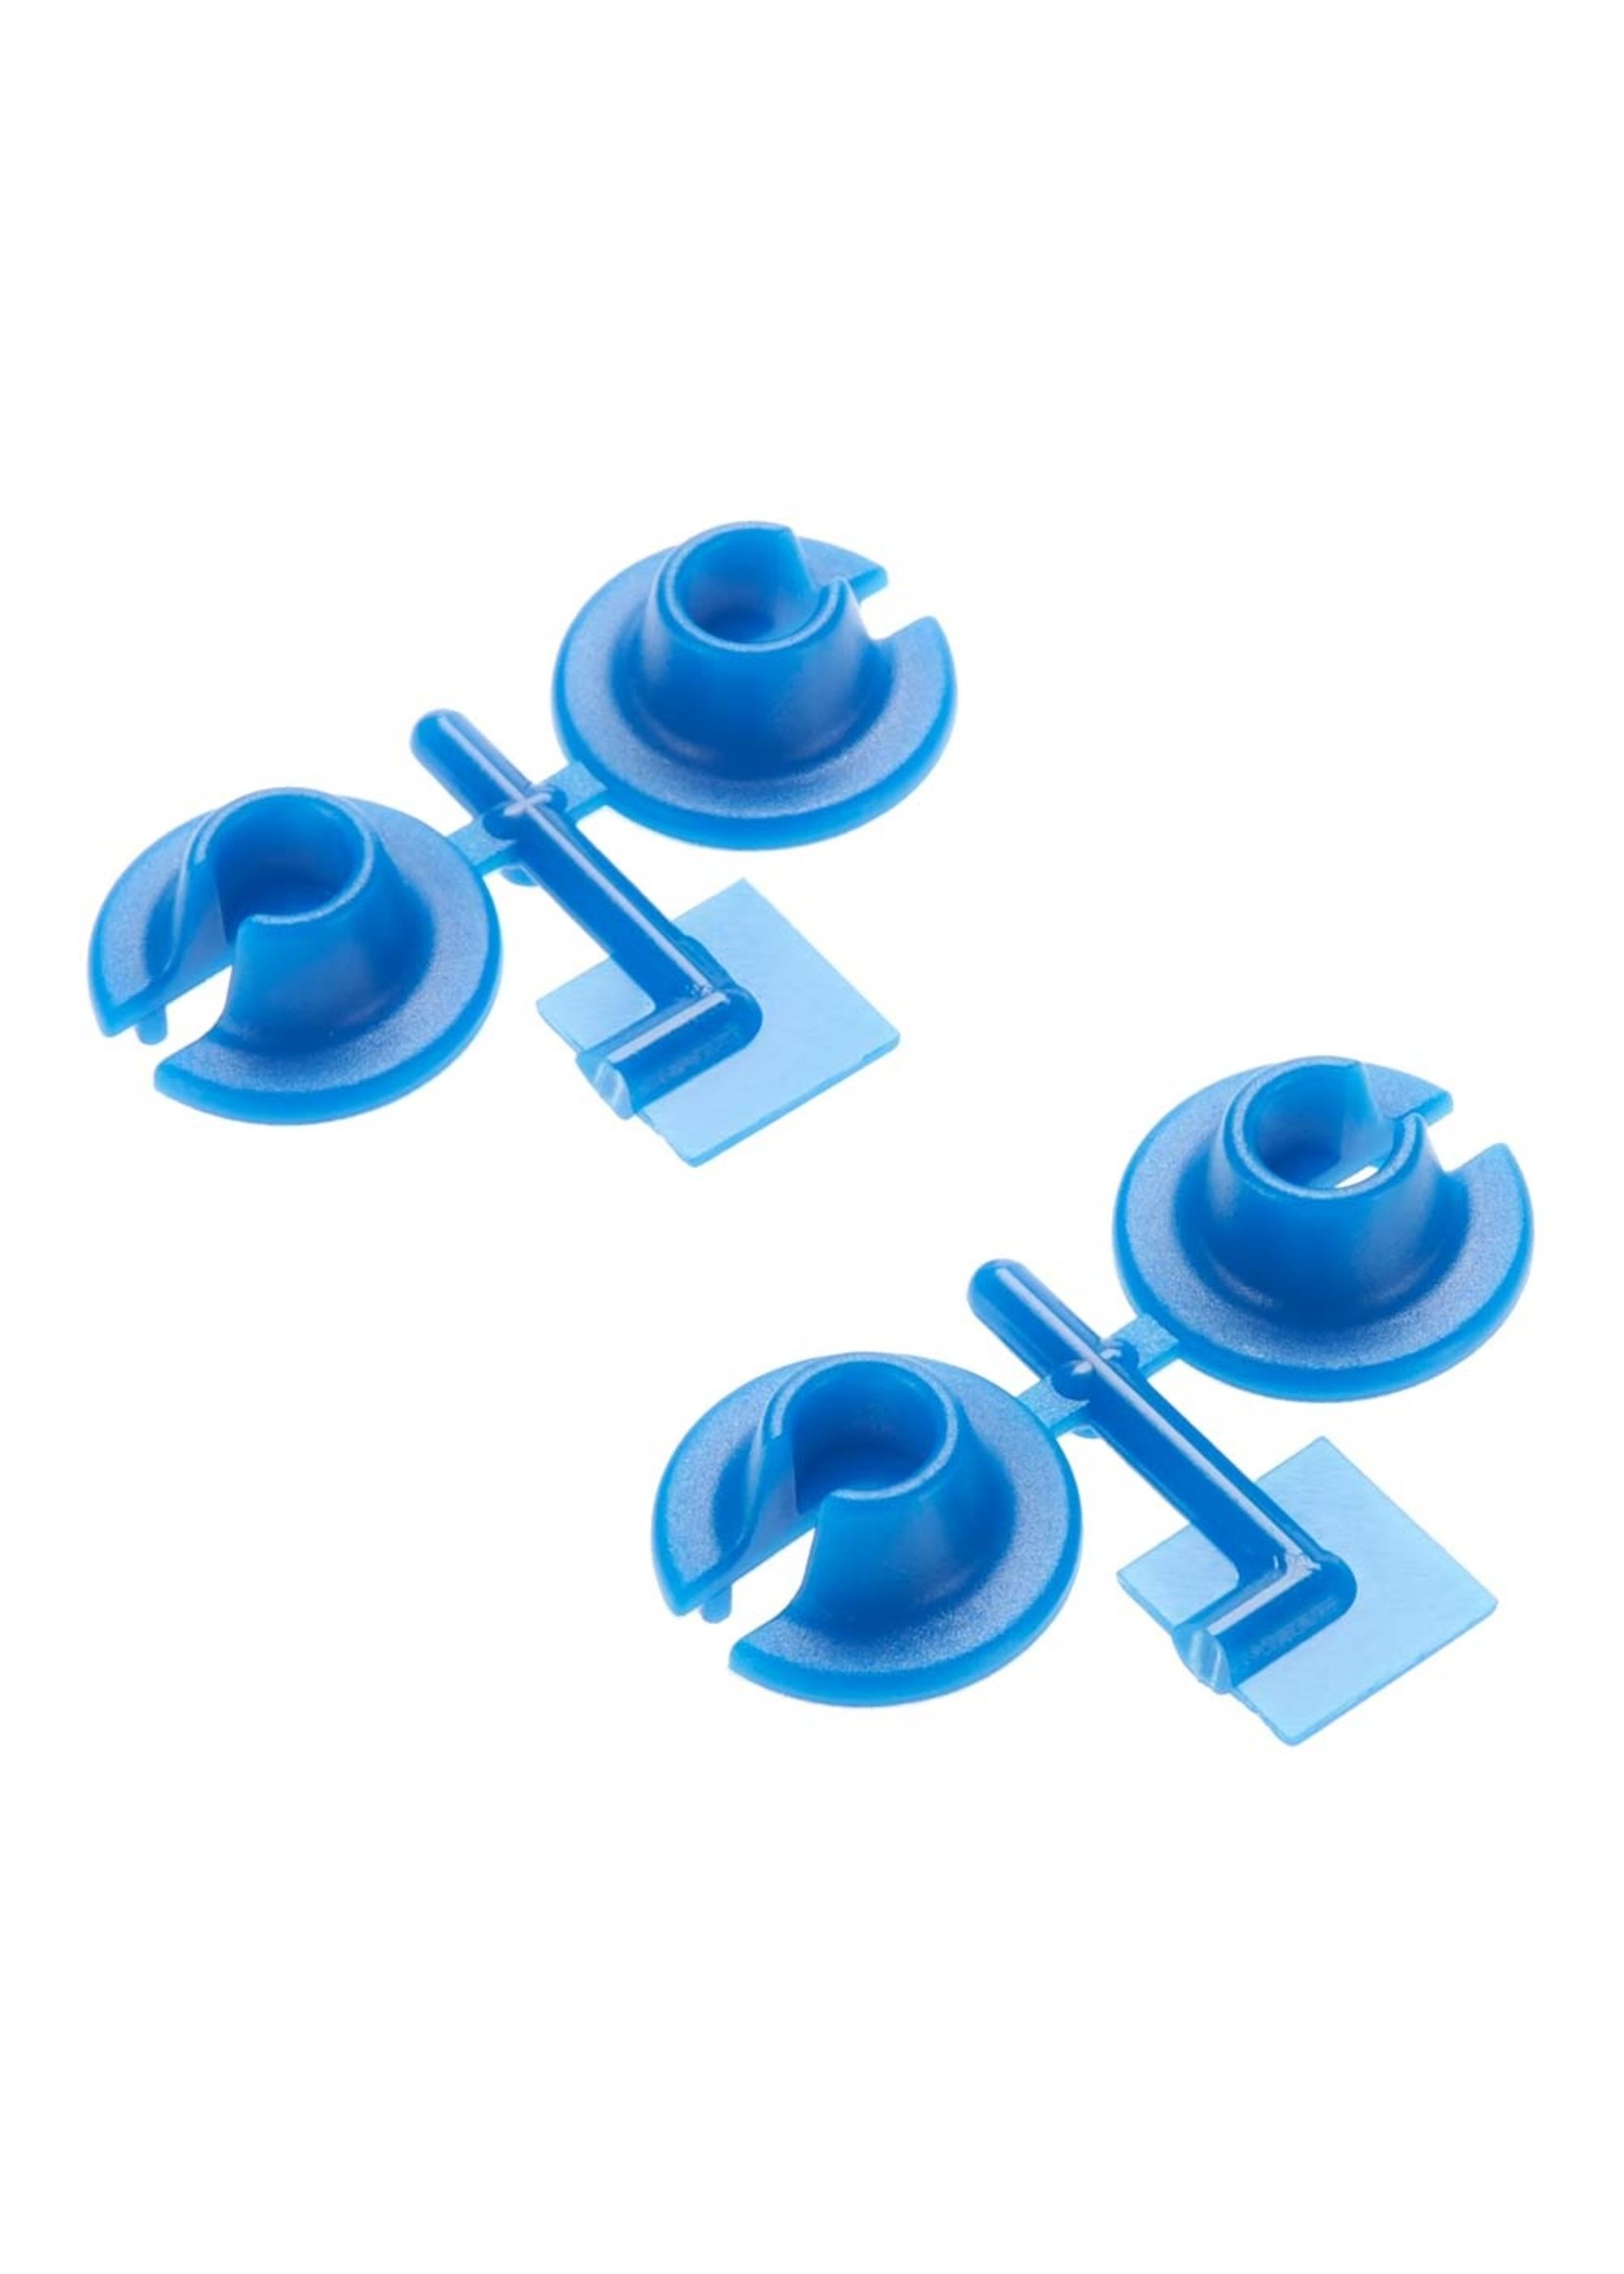 RPM 73155 - Lower Shock Spring Cups - Blue